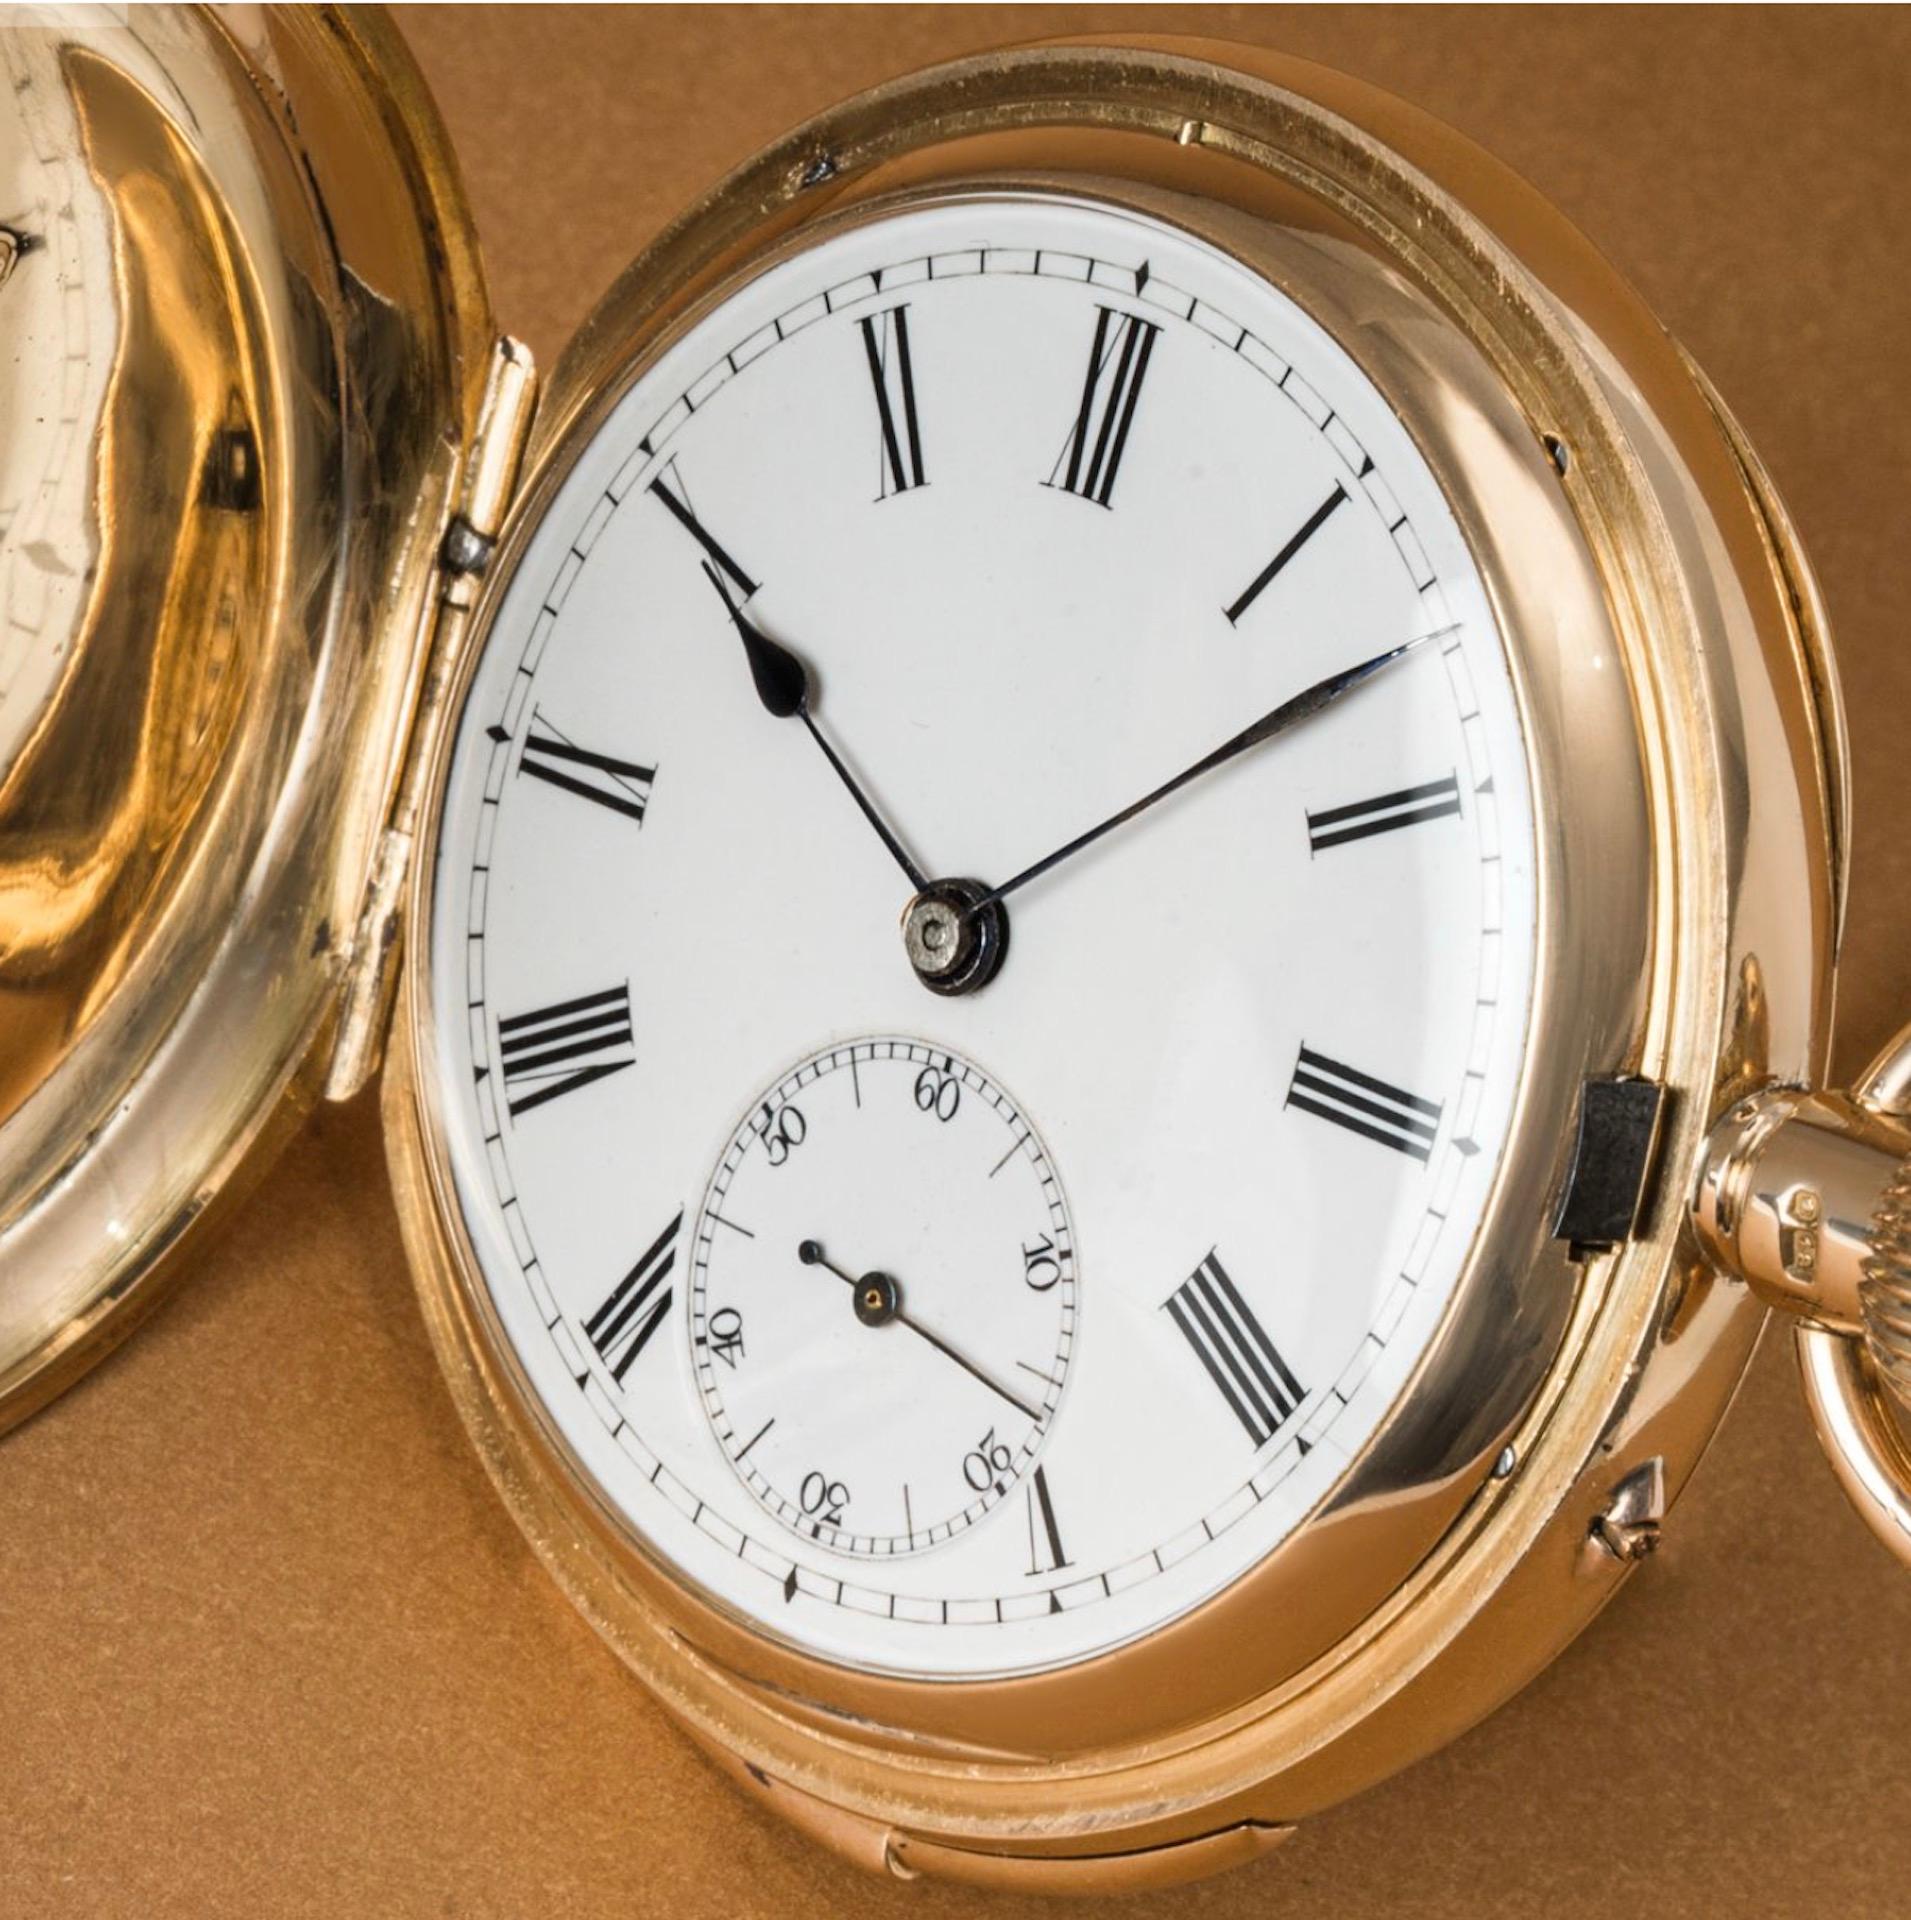 Le Coultre. A Heavy 18ct Gold Keyless Lever Minute Repeater Full Hunter Pocket Watch C1900s.

Dial: The pristine white enamel dial with Roman Numerals outer minute track and subsidiary seconds dial at six o'clock with matching blued steel spade